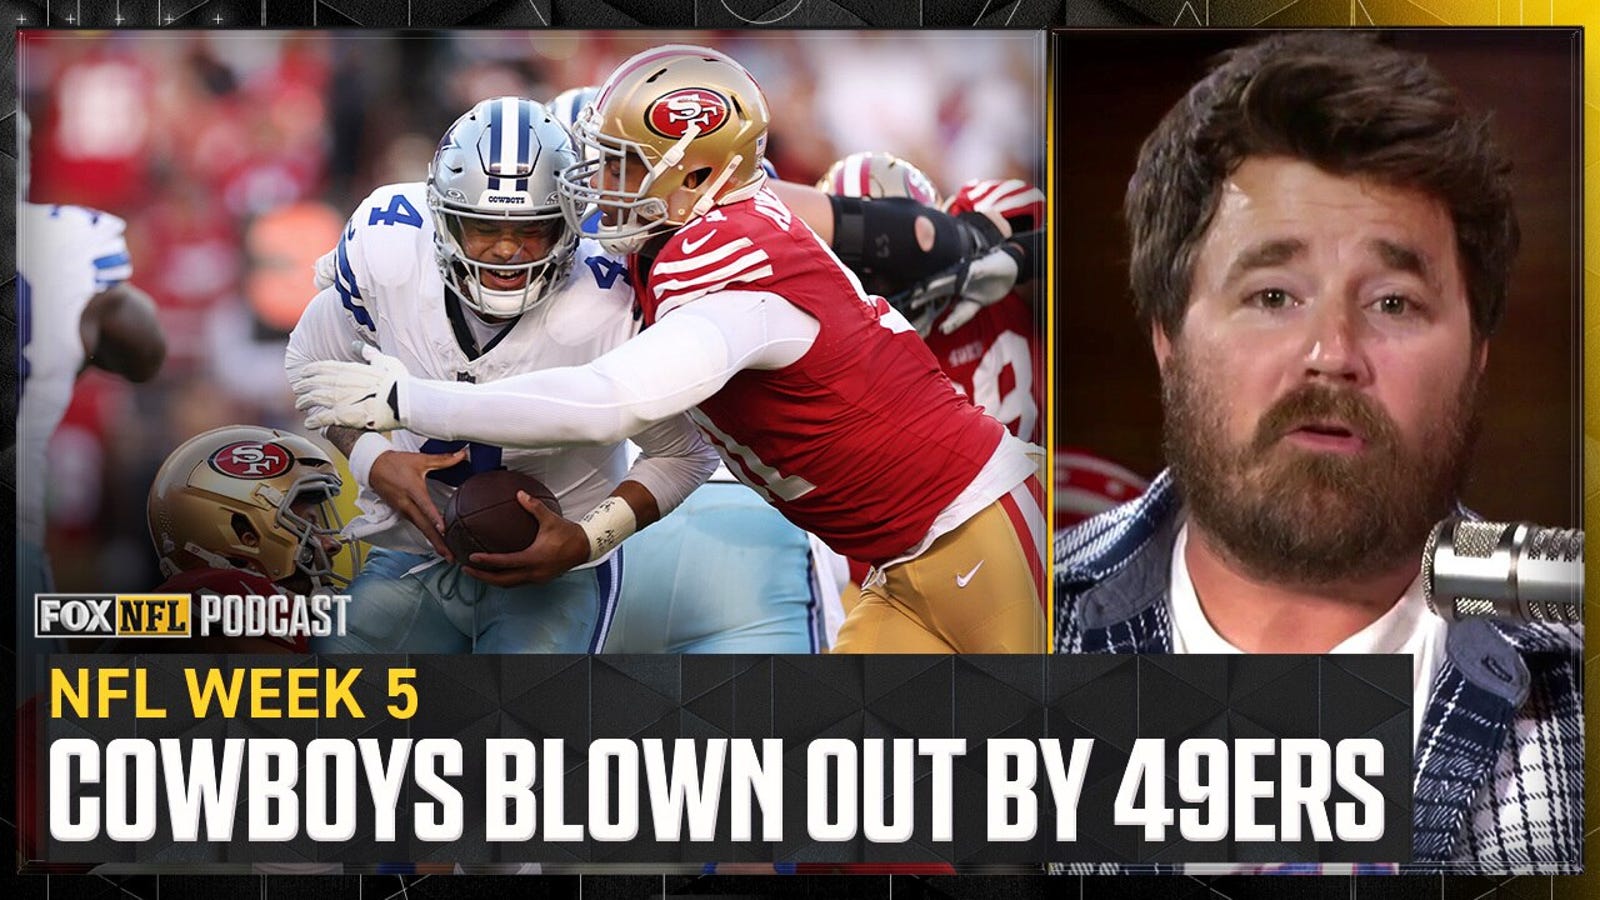 Dave Helman reacts to Cowboys being crushed by 49ers 